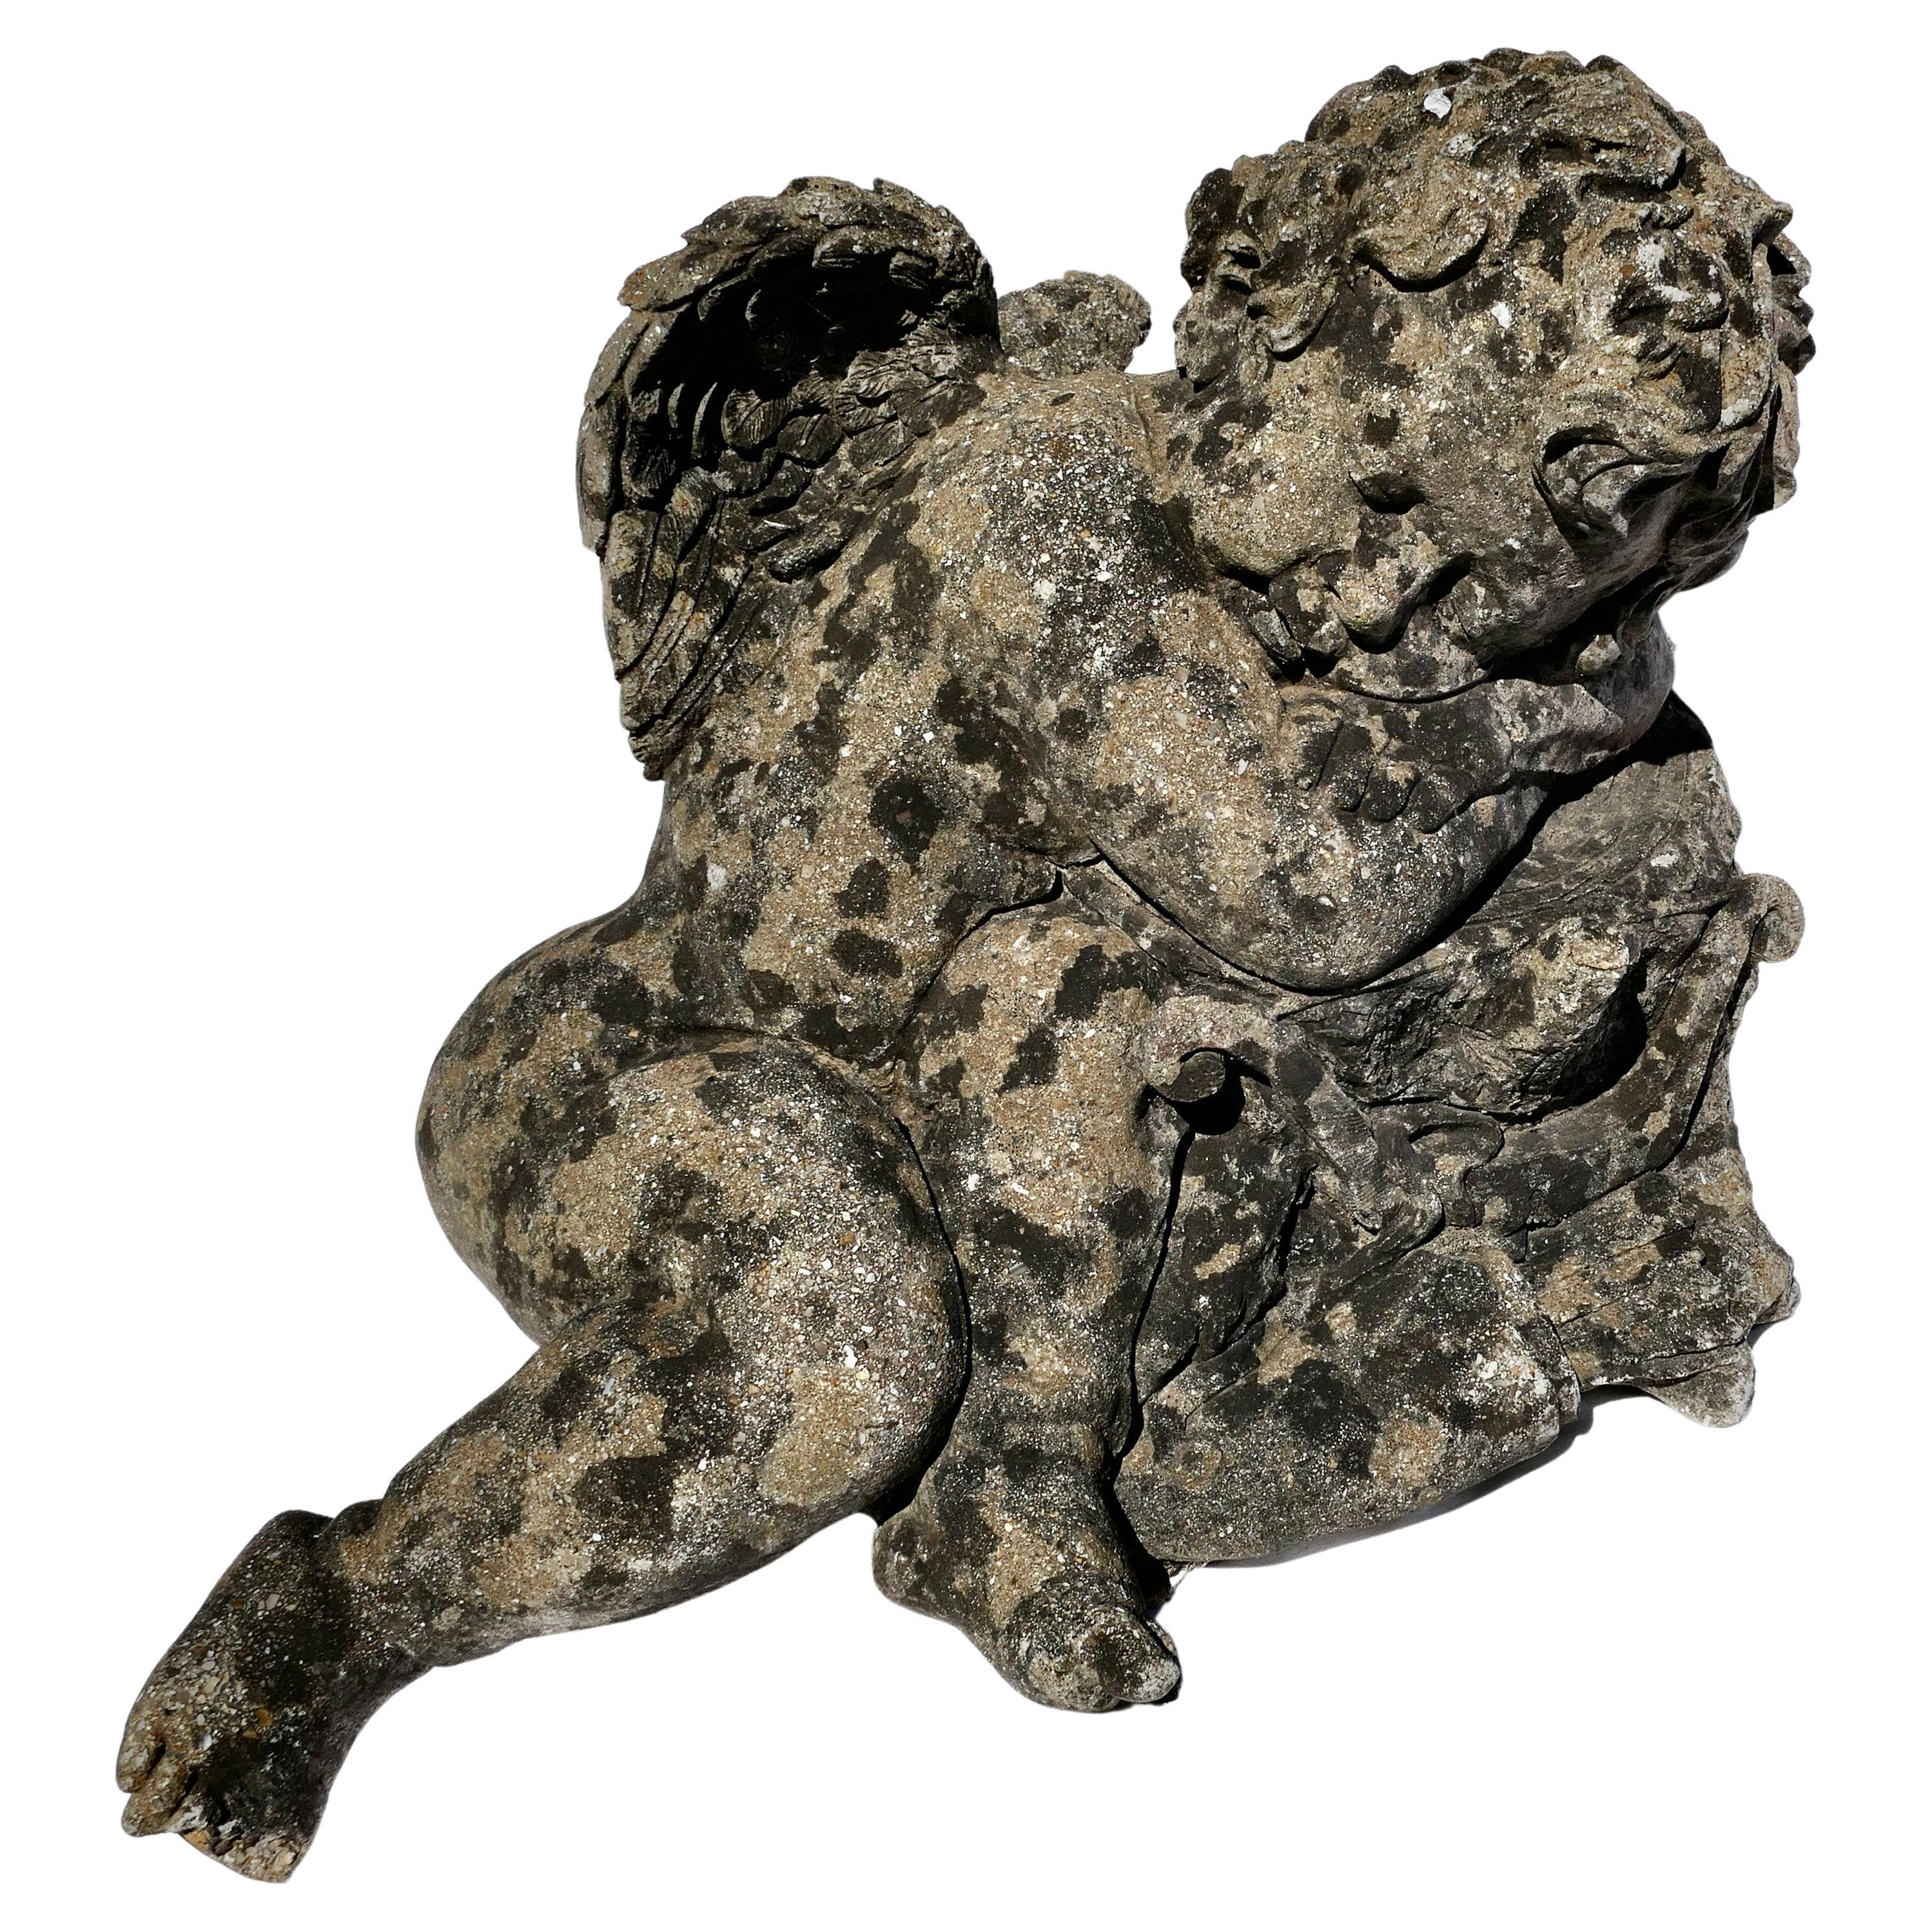 French Weathered Stone Statue of a Sleeping Putti, Baby Cherub with Wings